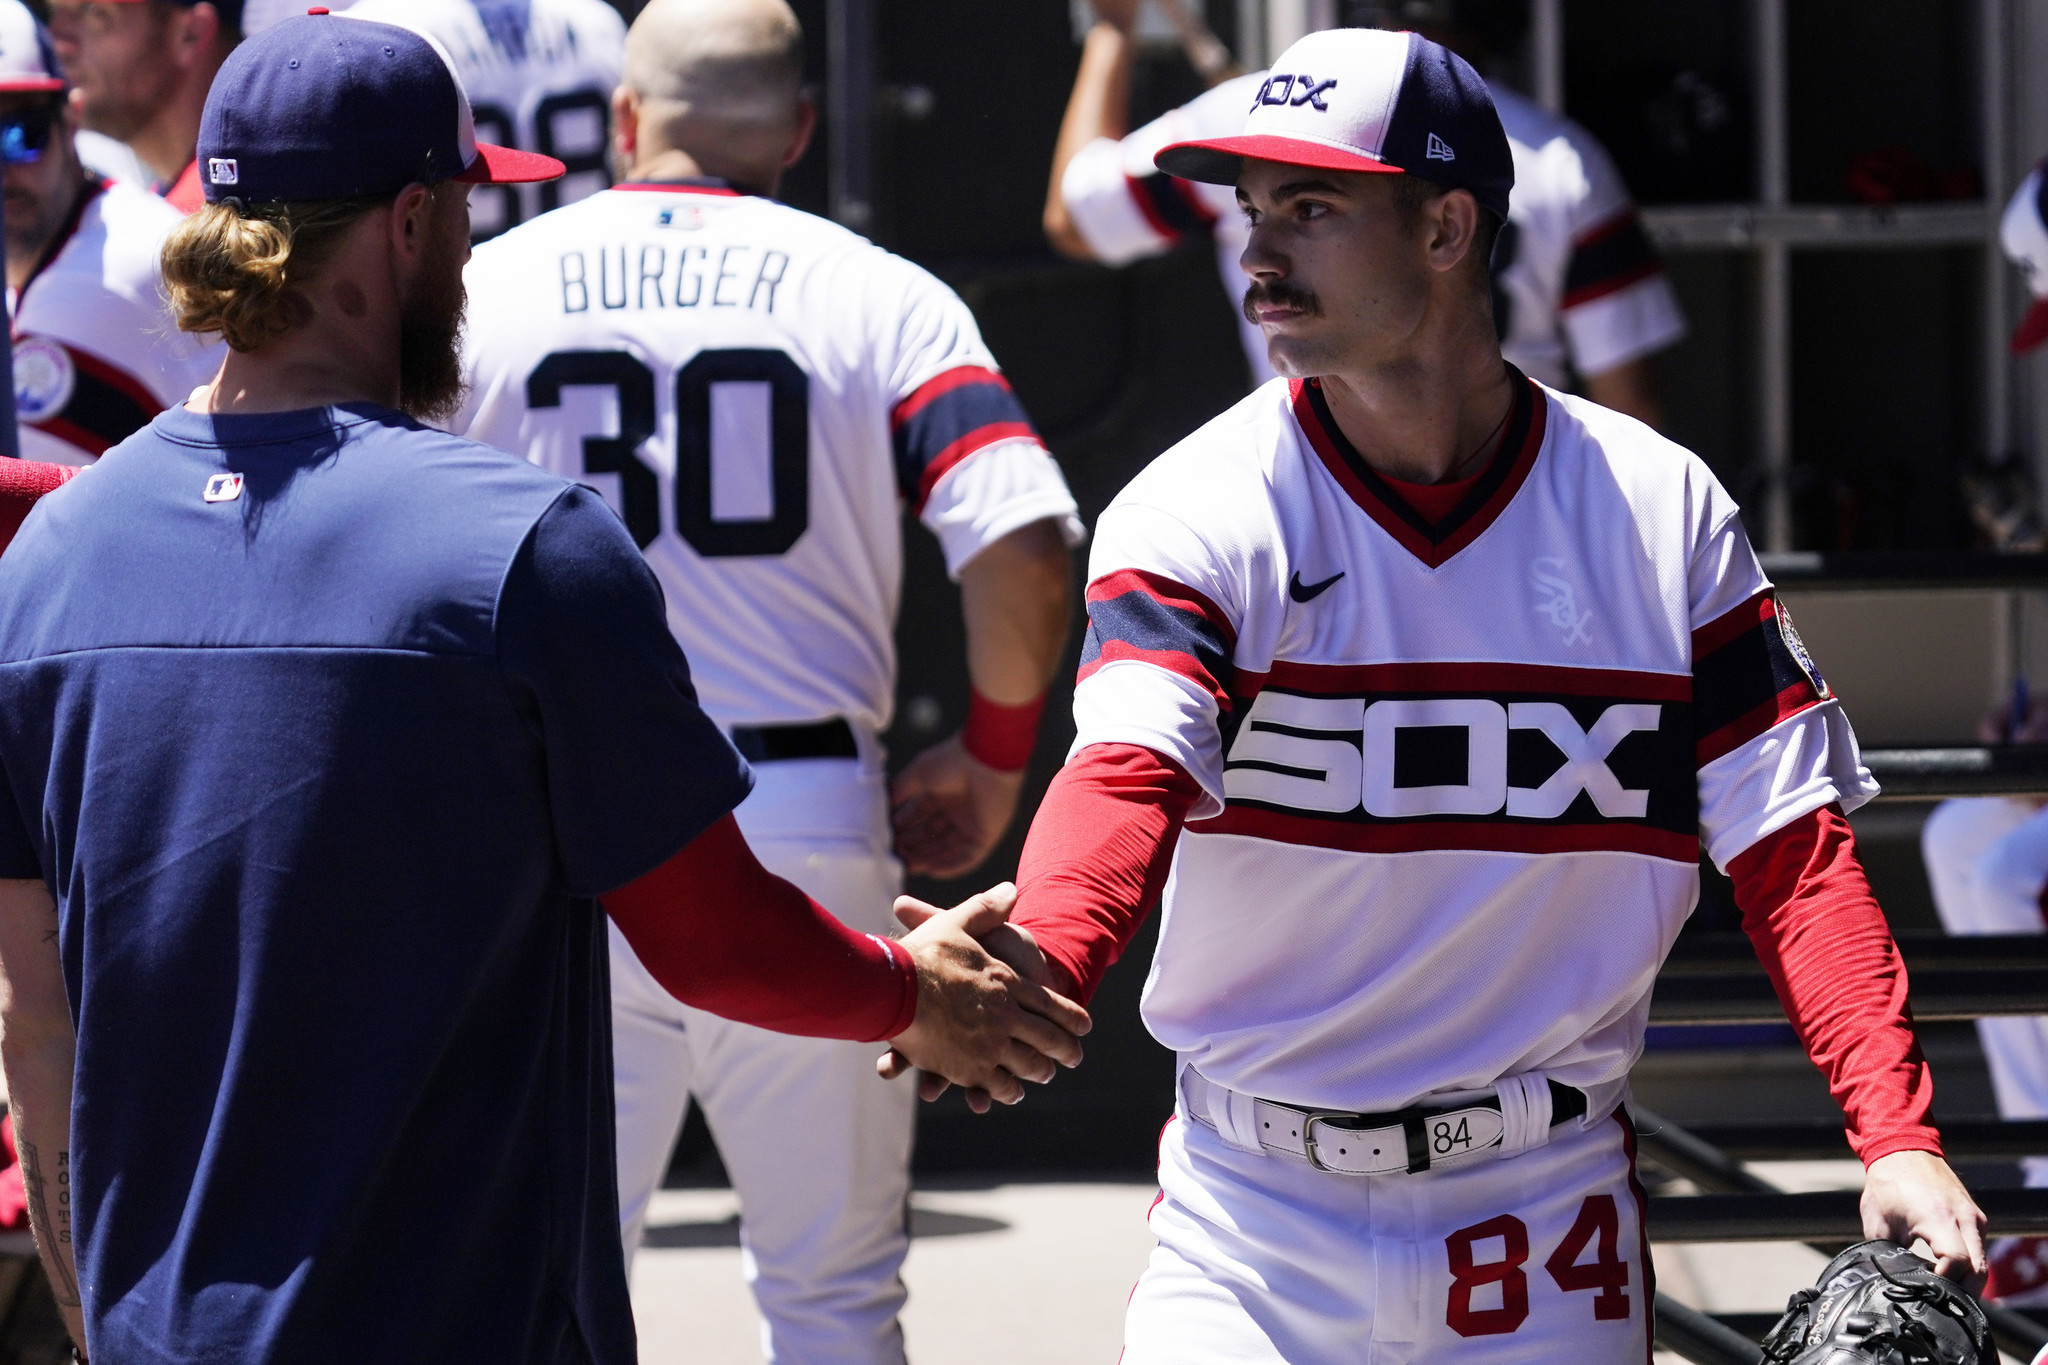 Chicago White Sox: Dylan Cease strikes out 13 in victory